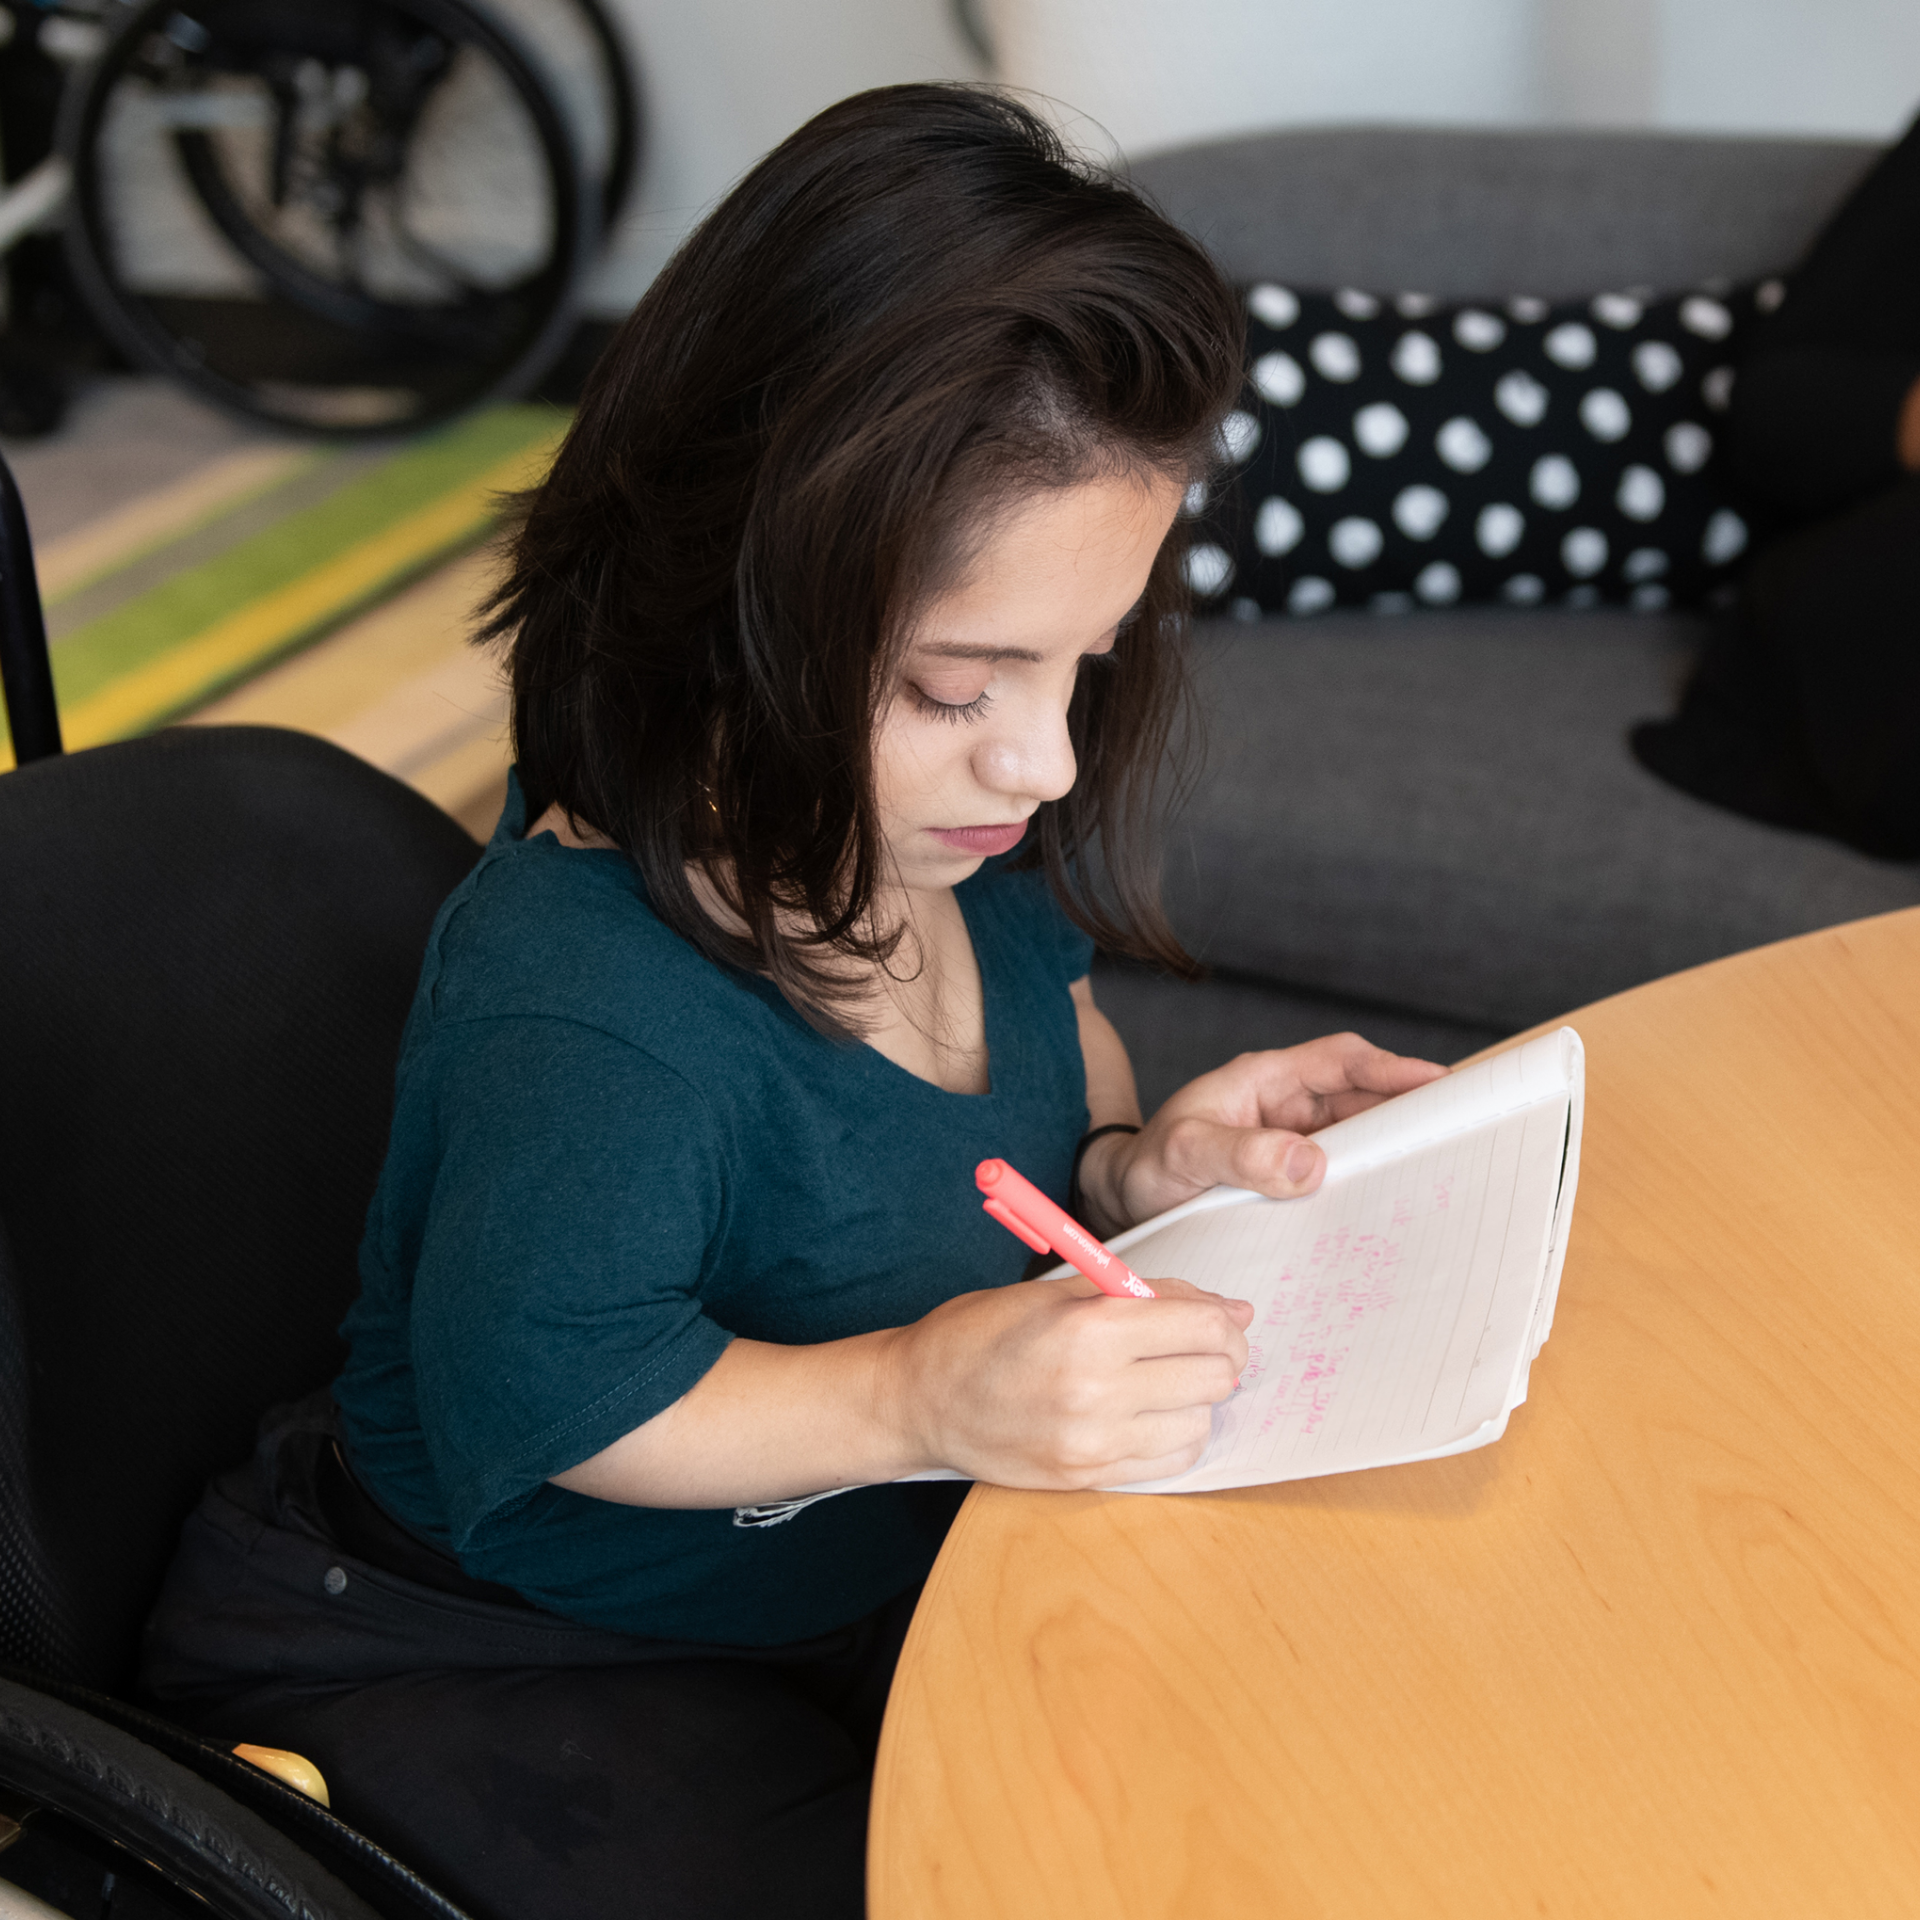 A South Asian person in her wheelchair takes notes by hand during a meeting.